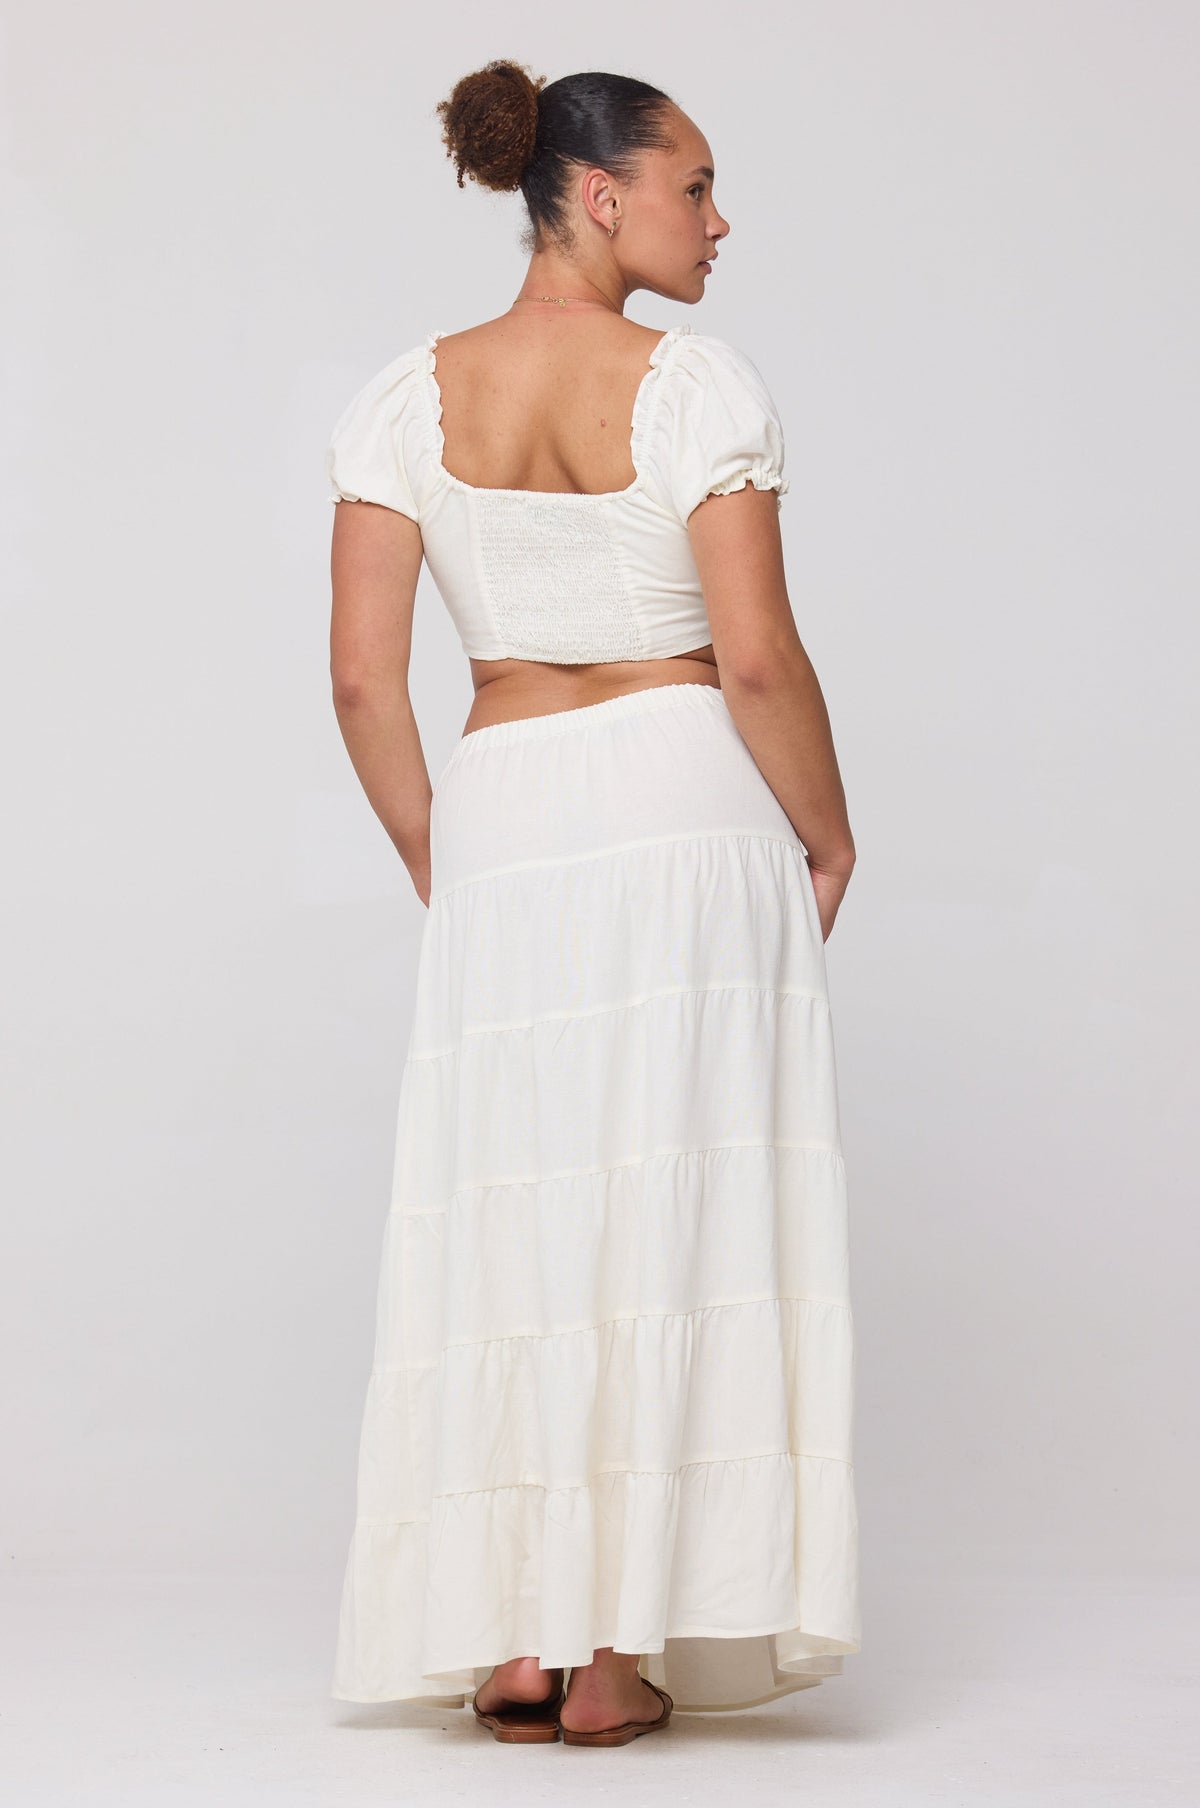 This is an image of Jess Top in White Linen - RESA featuring a model wearing the dress